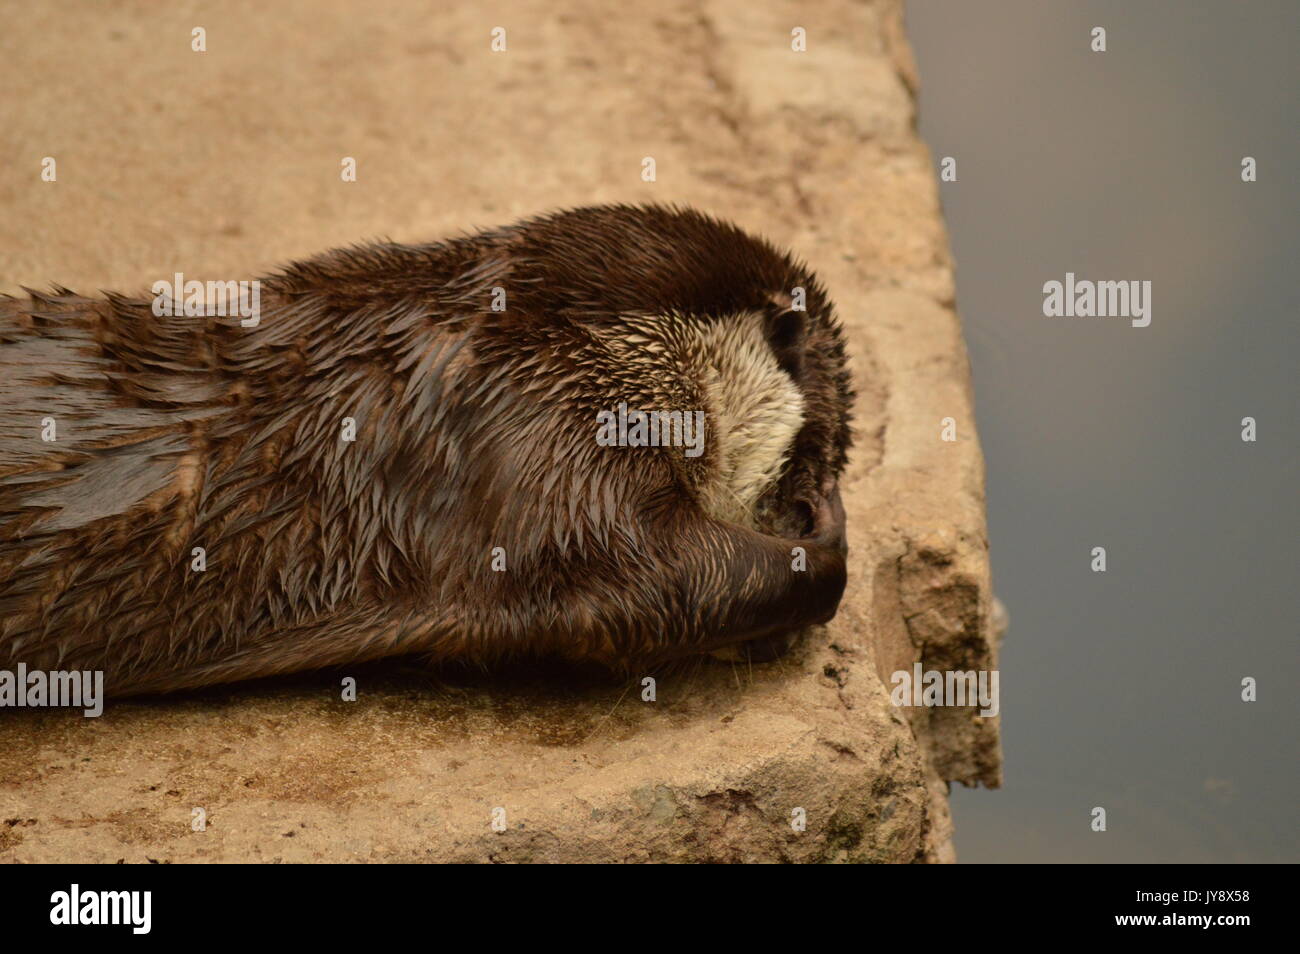 Cape Clawless Otter Stockfoto